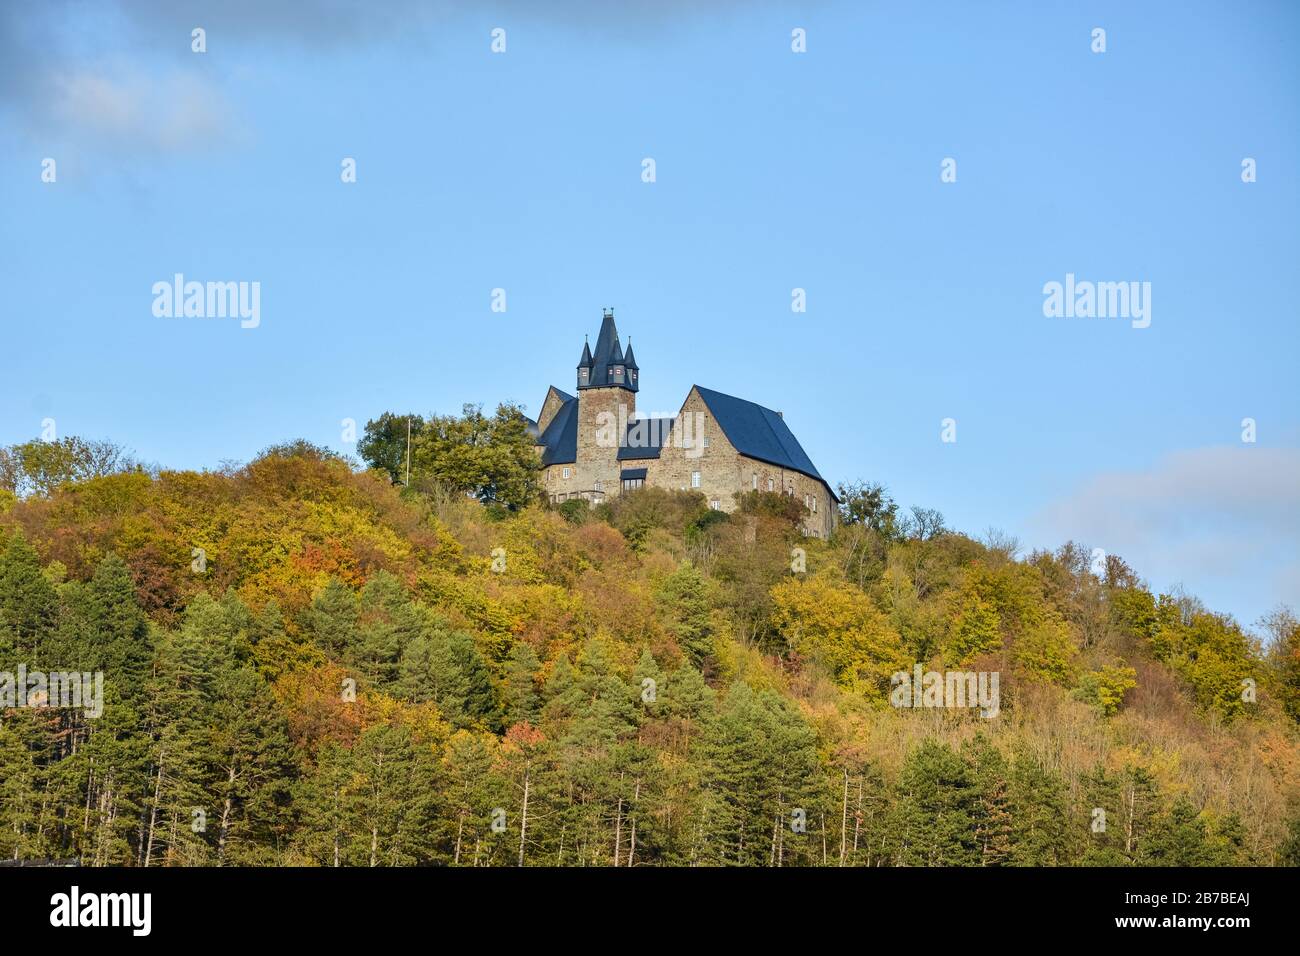 The castle in Spangenberg on a hill in north Hesse, Germany in autumn on a sunny day Stock Photo